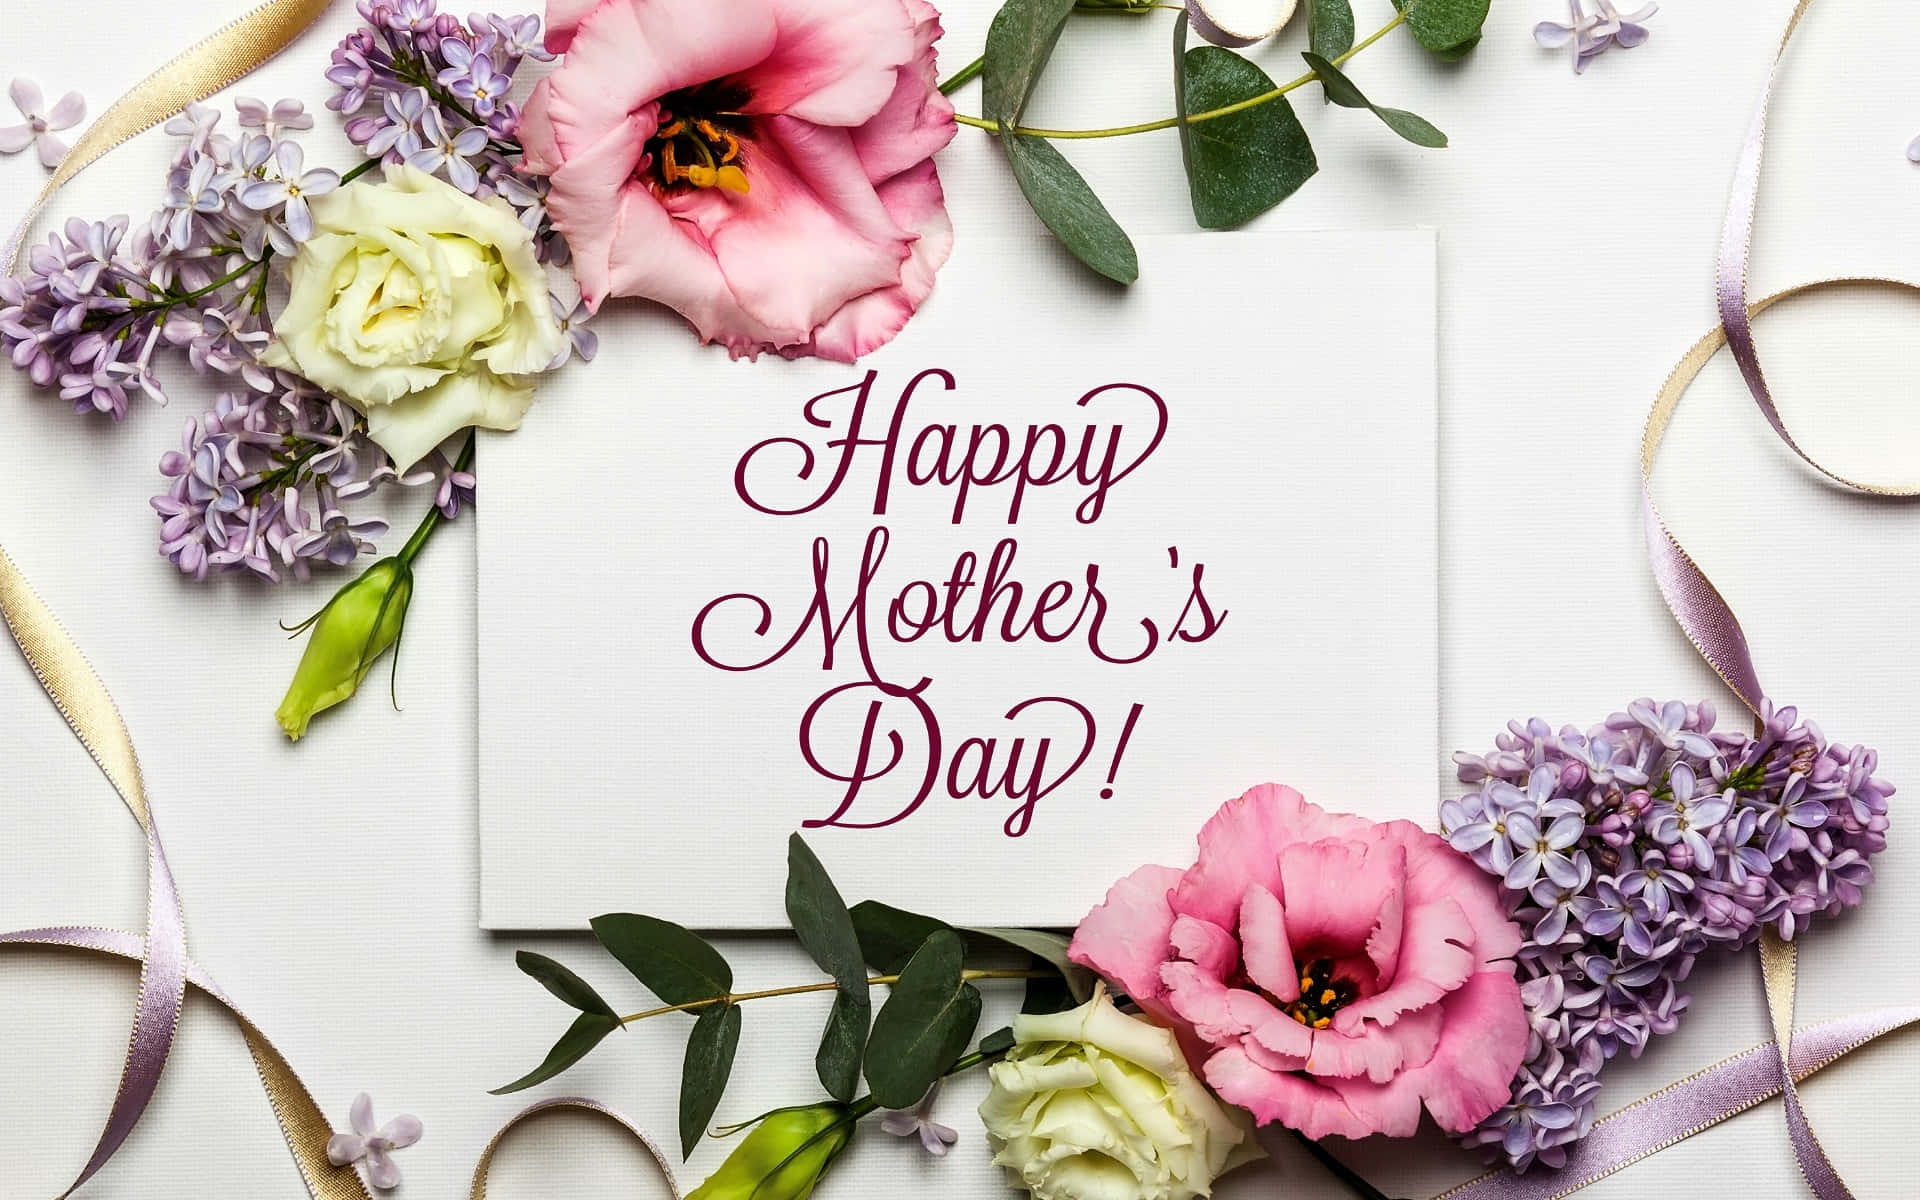 Happy Mother's Day Card With Flowers And Ribbon